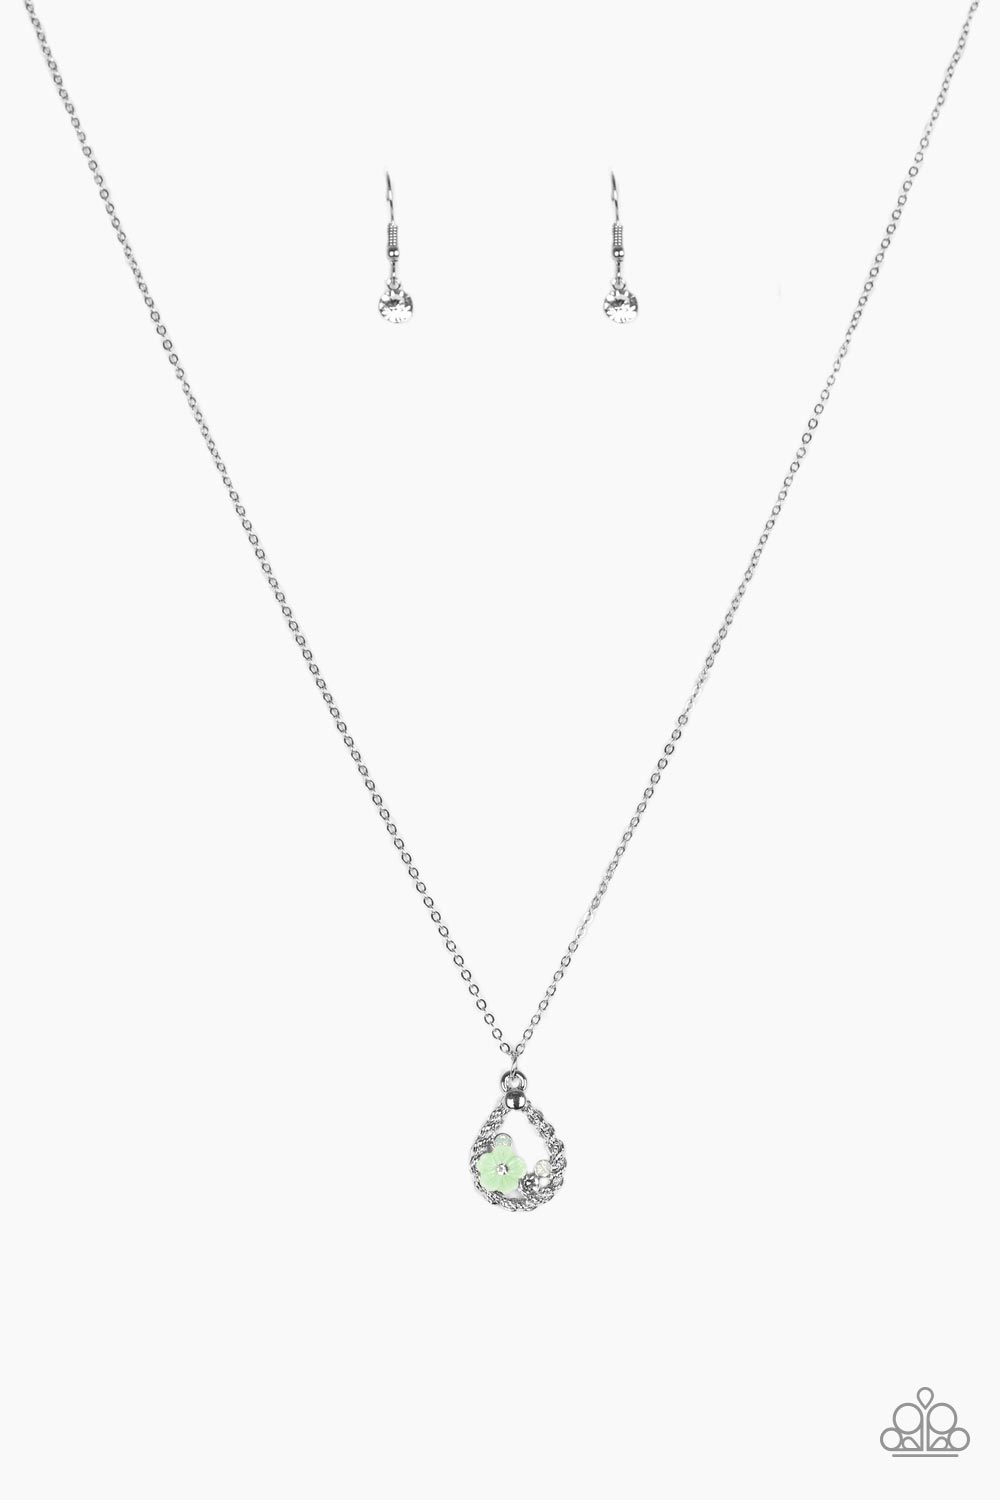 SERENE SPRING SHOWERS - GREEN NECKLACE